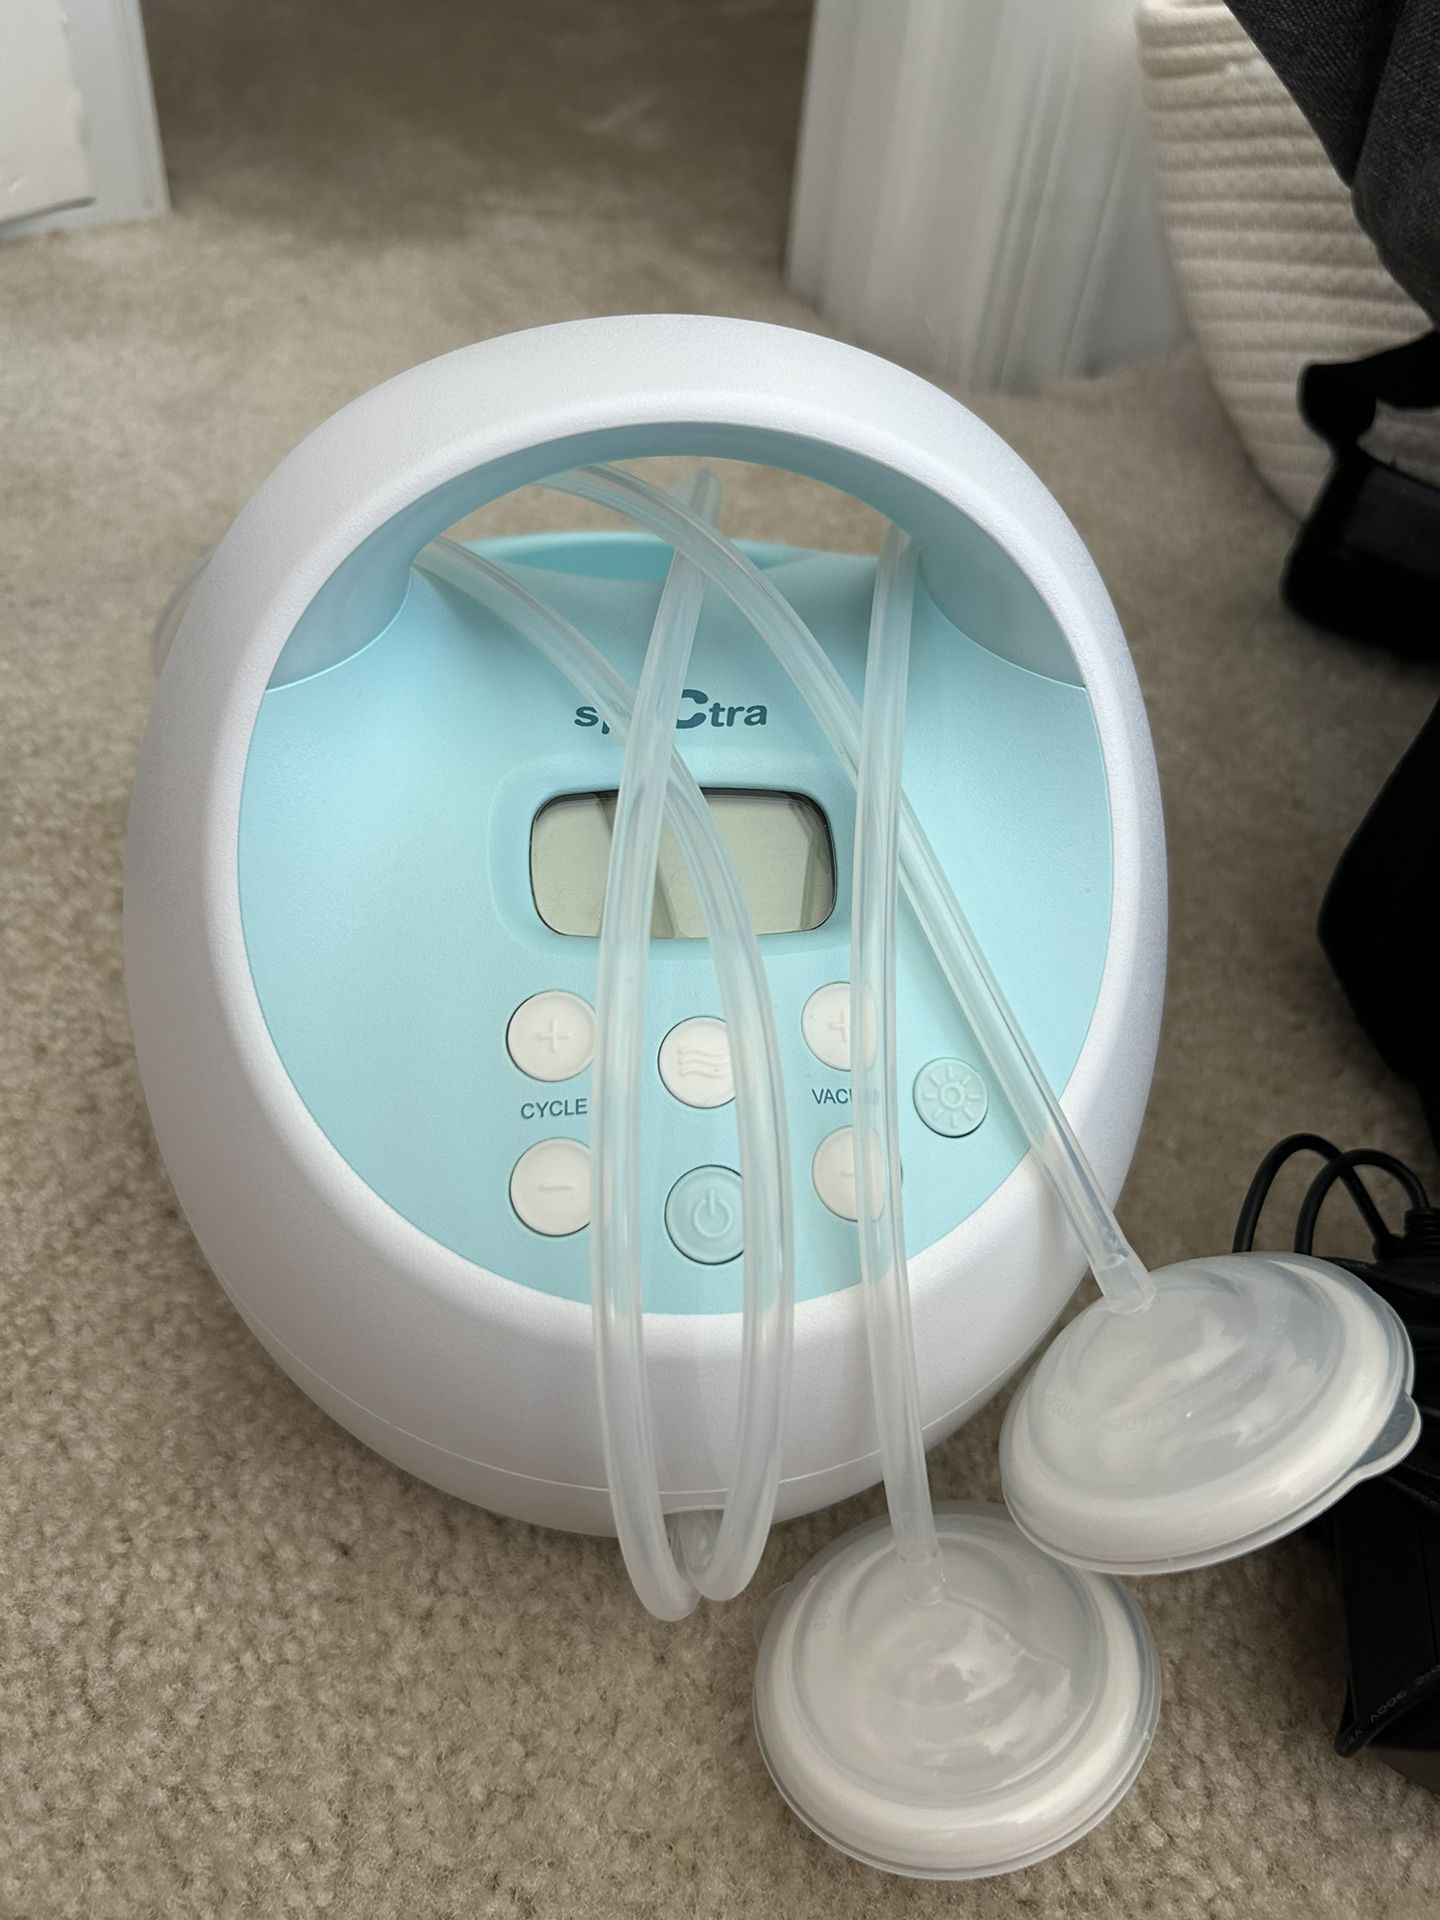 Spectra breast pump, carrying bag and supplies 